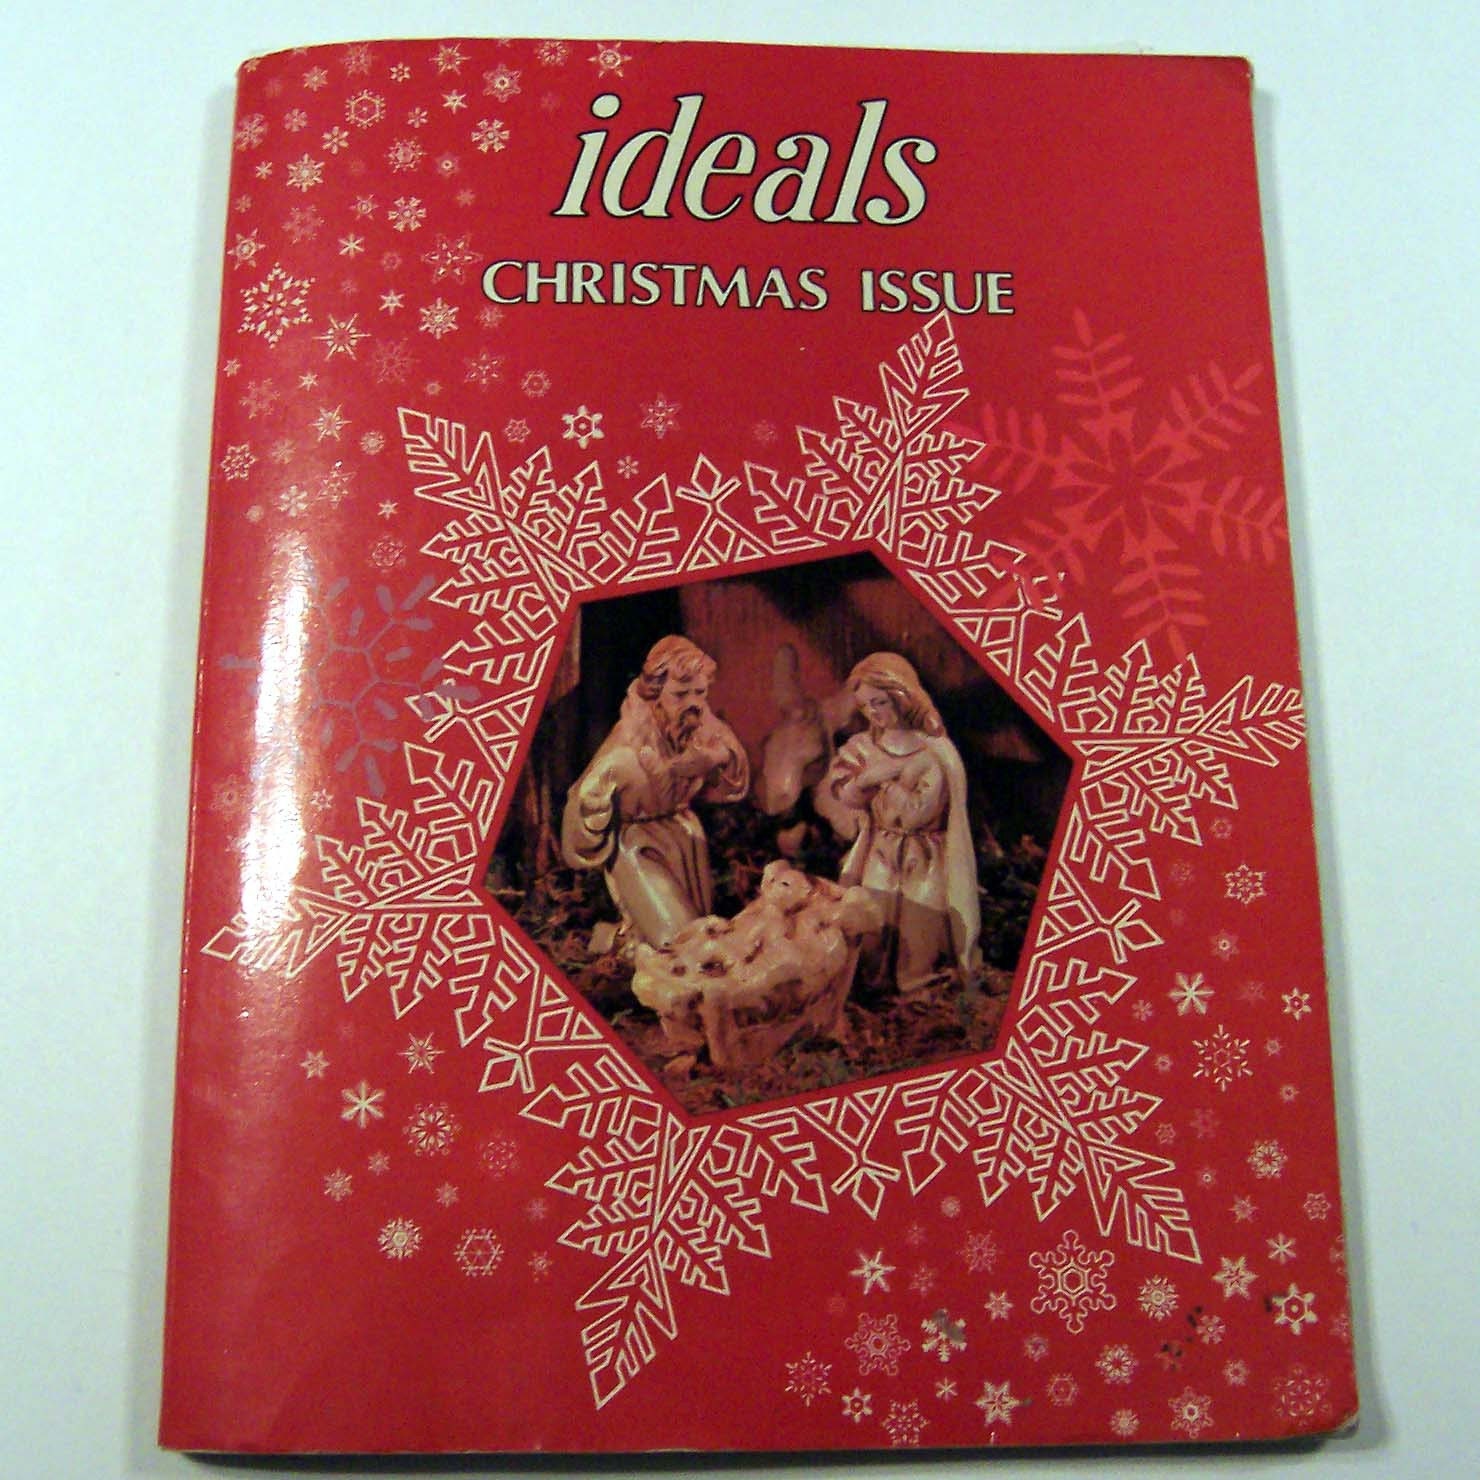 Vintage Ideals Christmas Issue Book